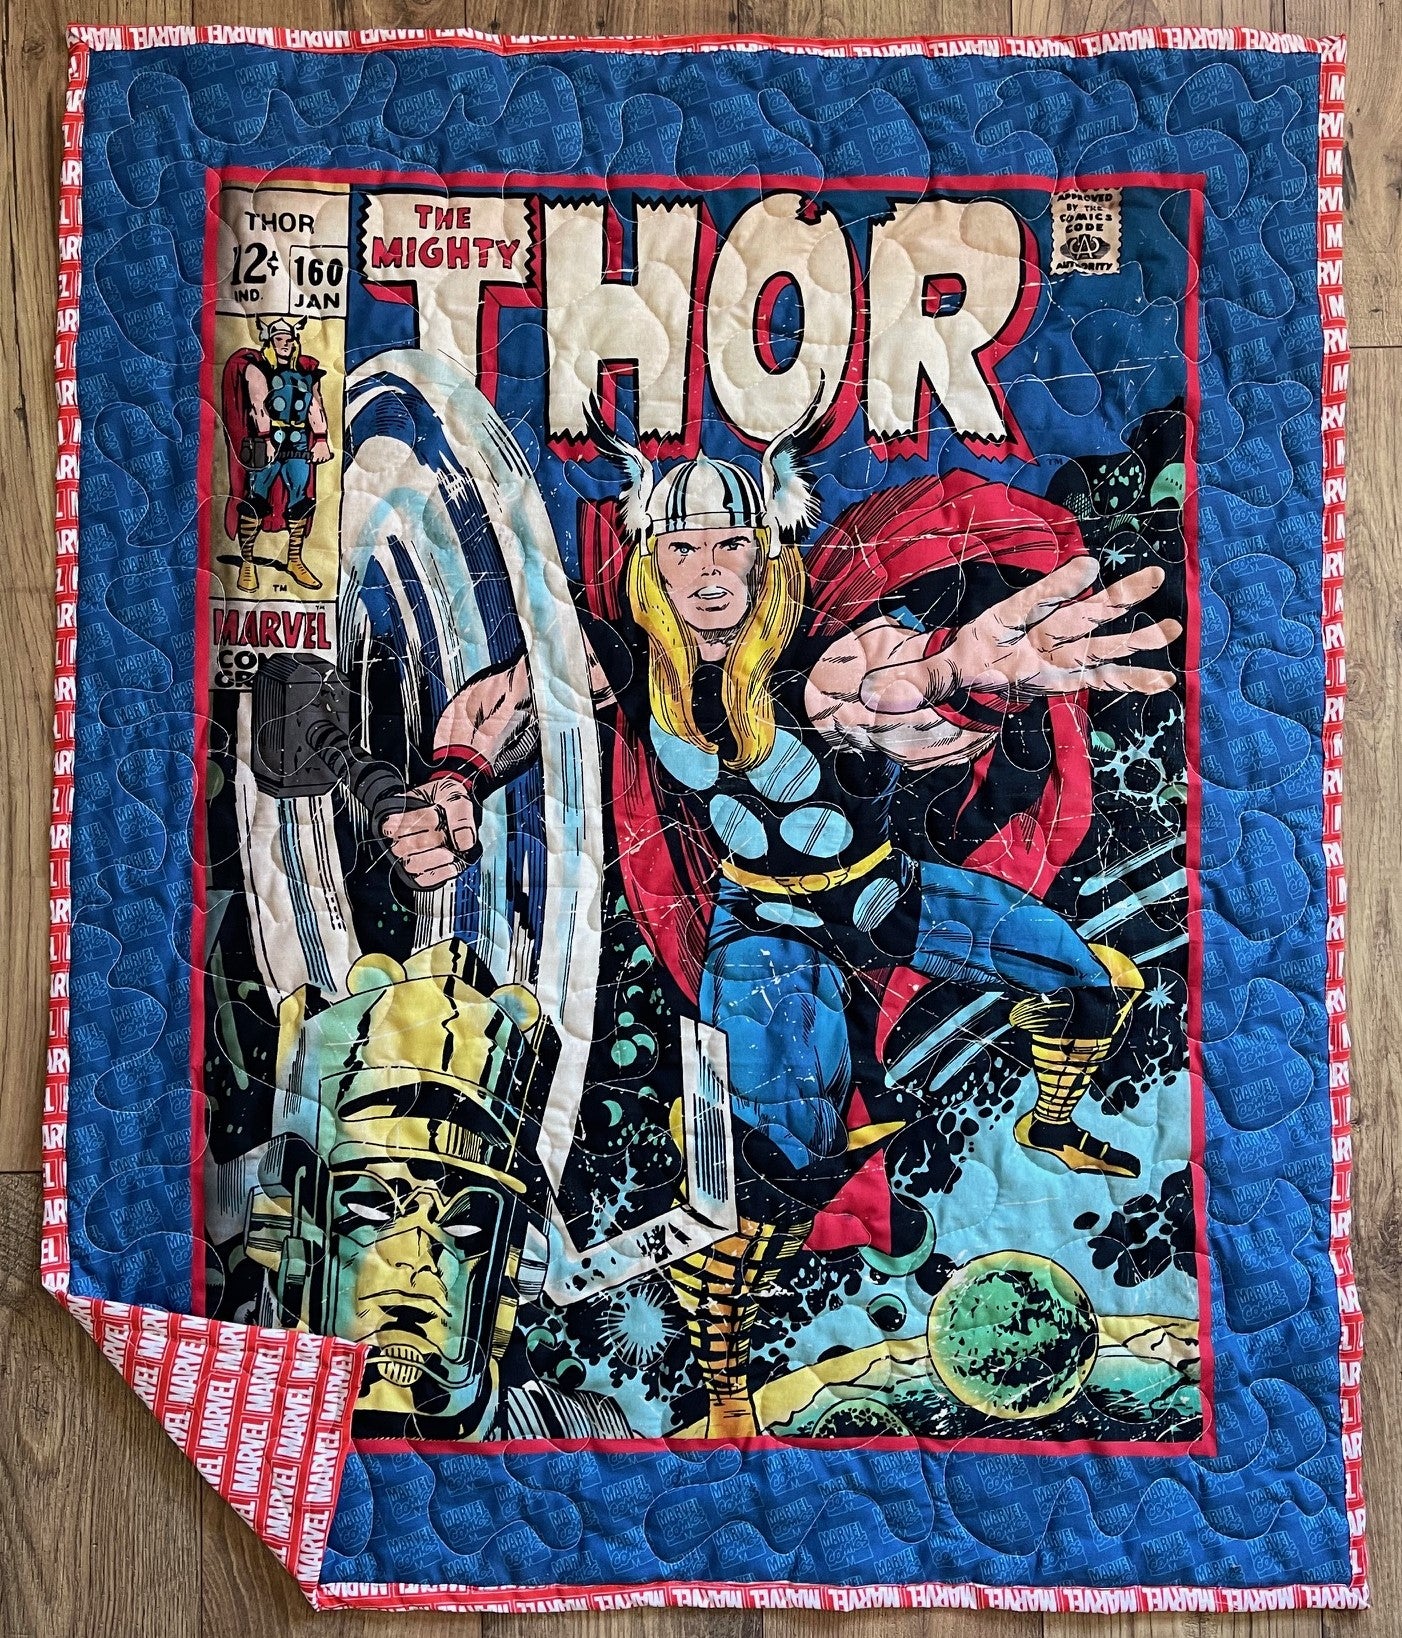 MARVEL COMICS SUPERHERO AVENGERS "THOR" COMICBOOK COVER 36"X44" Quilted Blanket 1 AVAILABLE